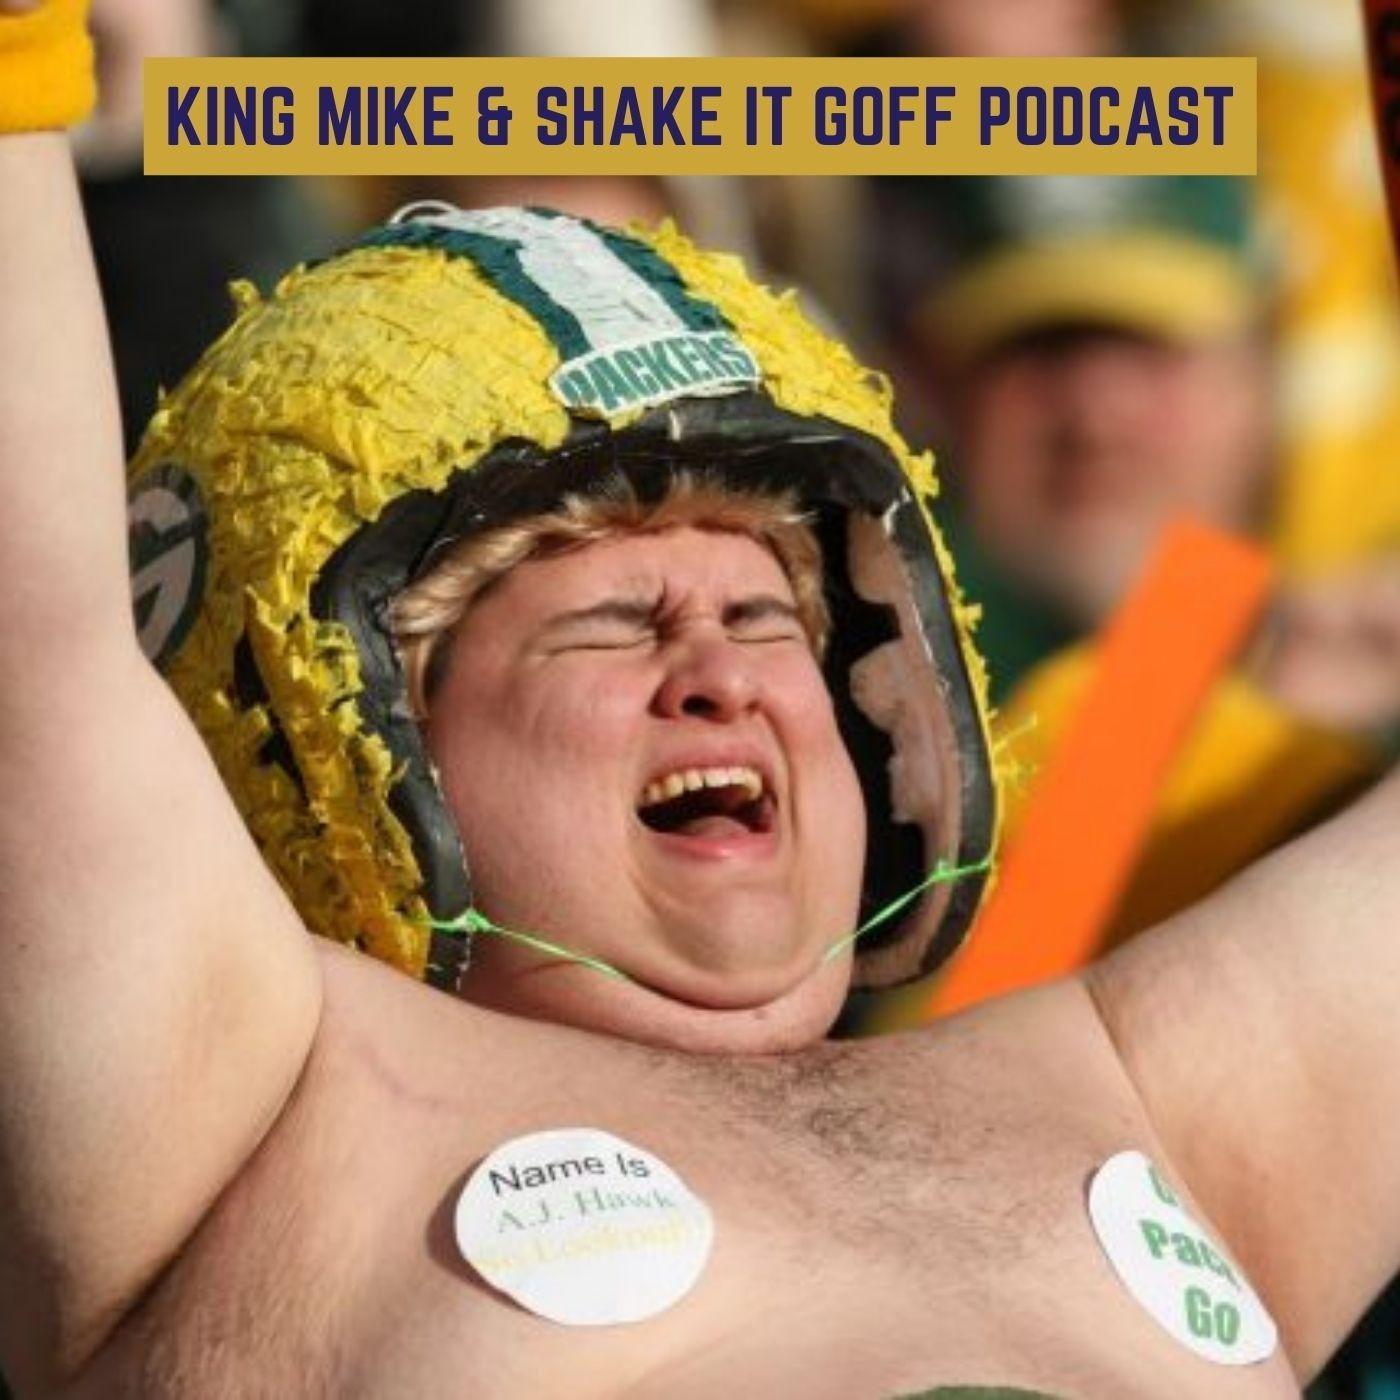 King Mike & Shake it Goff Podcast